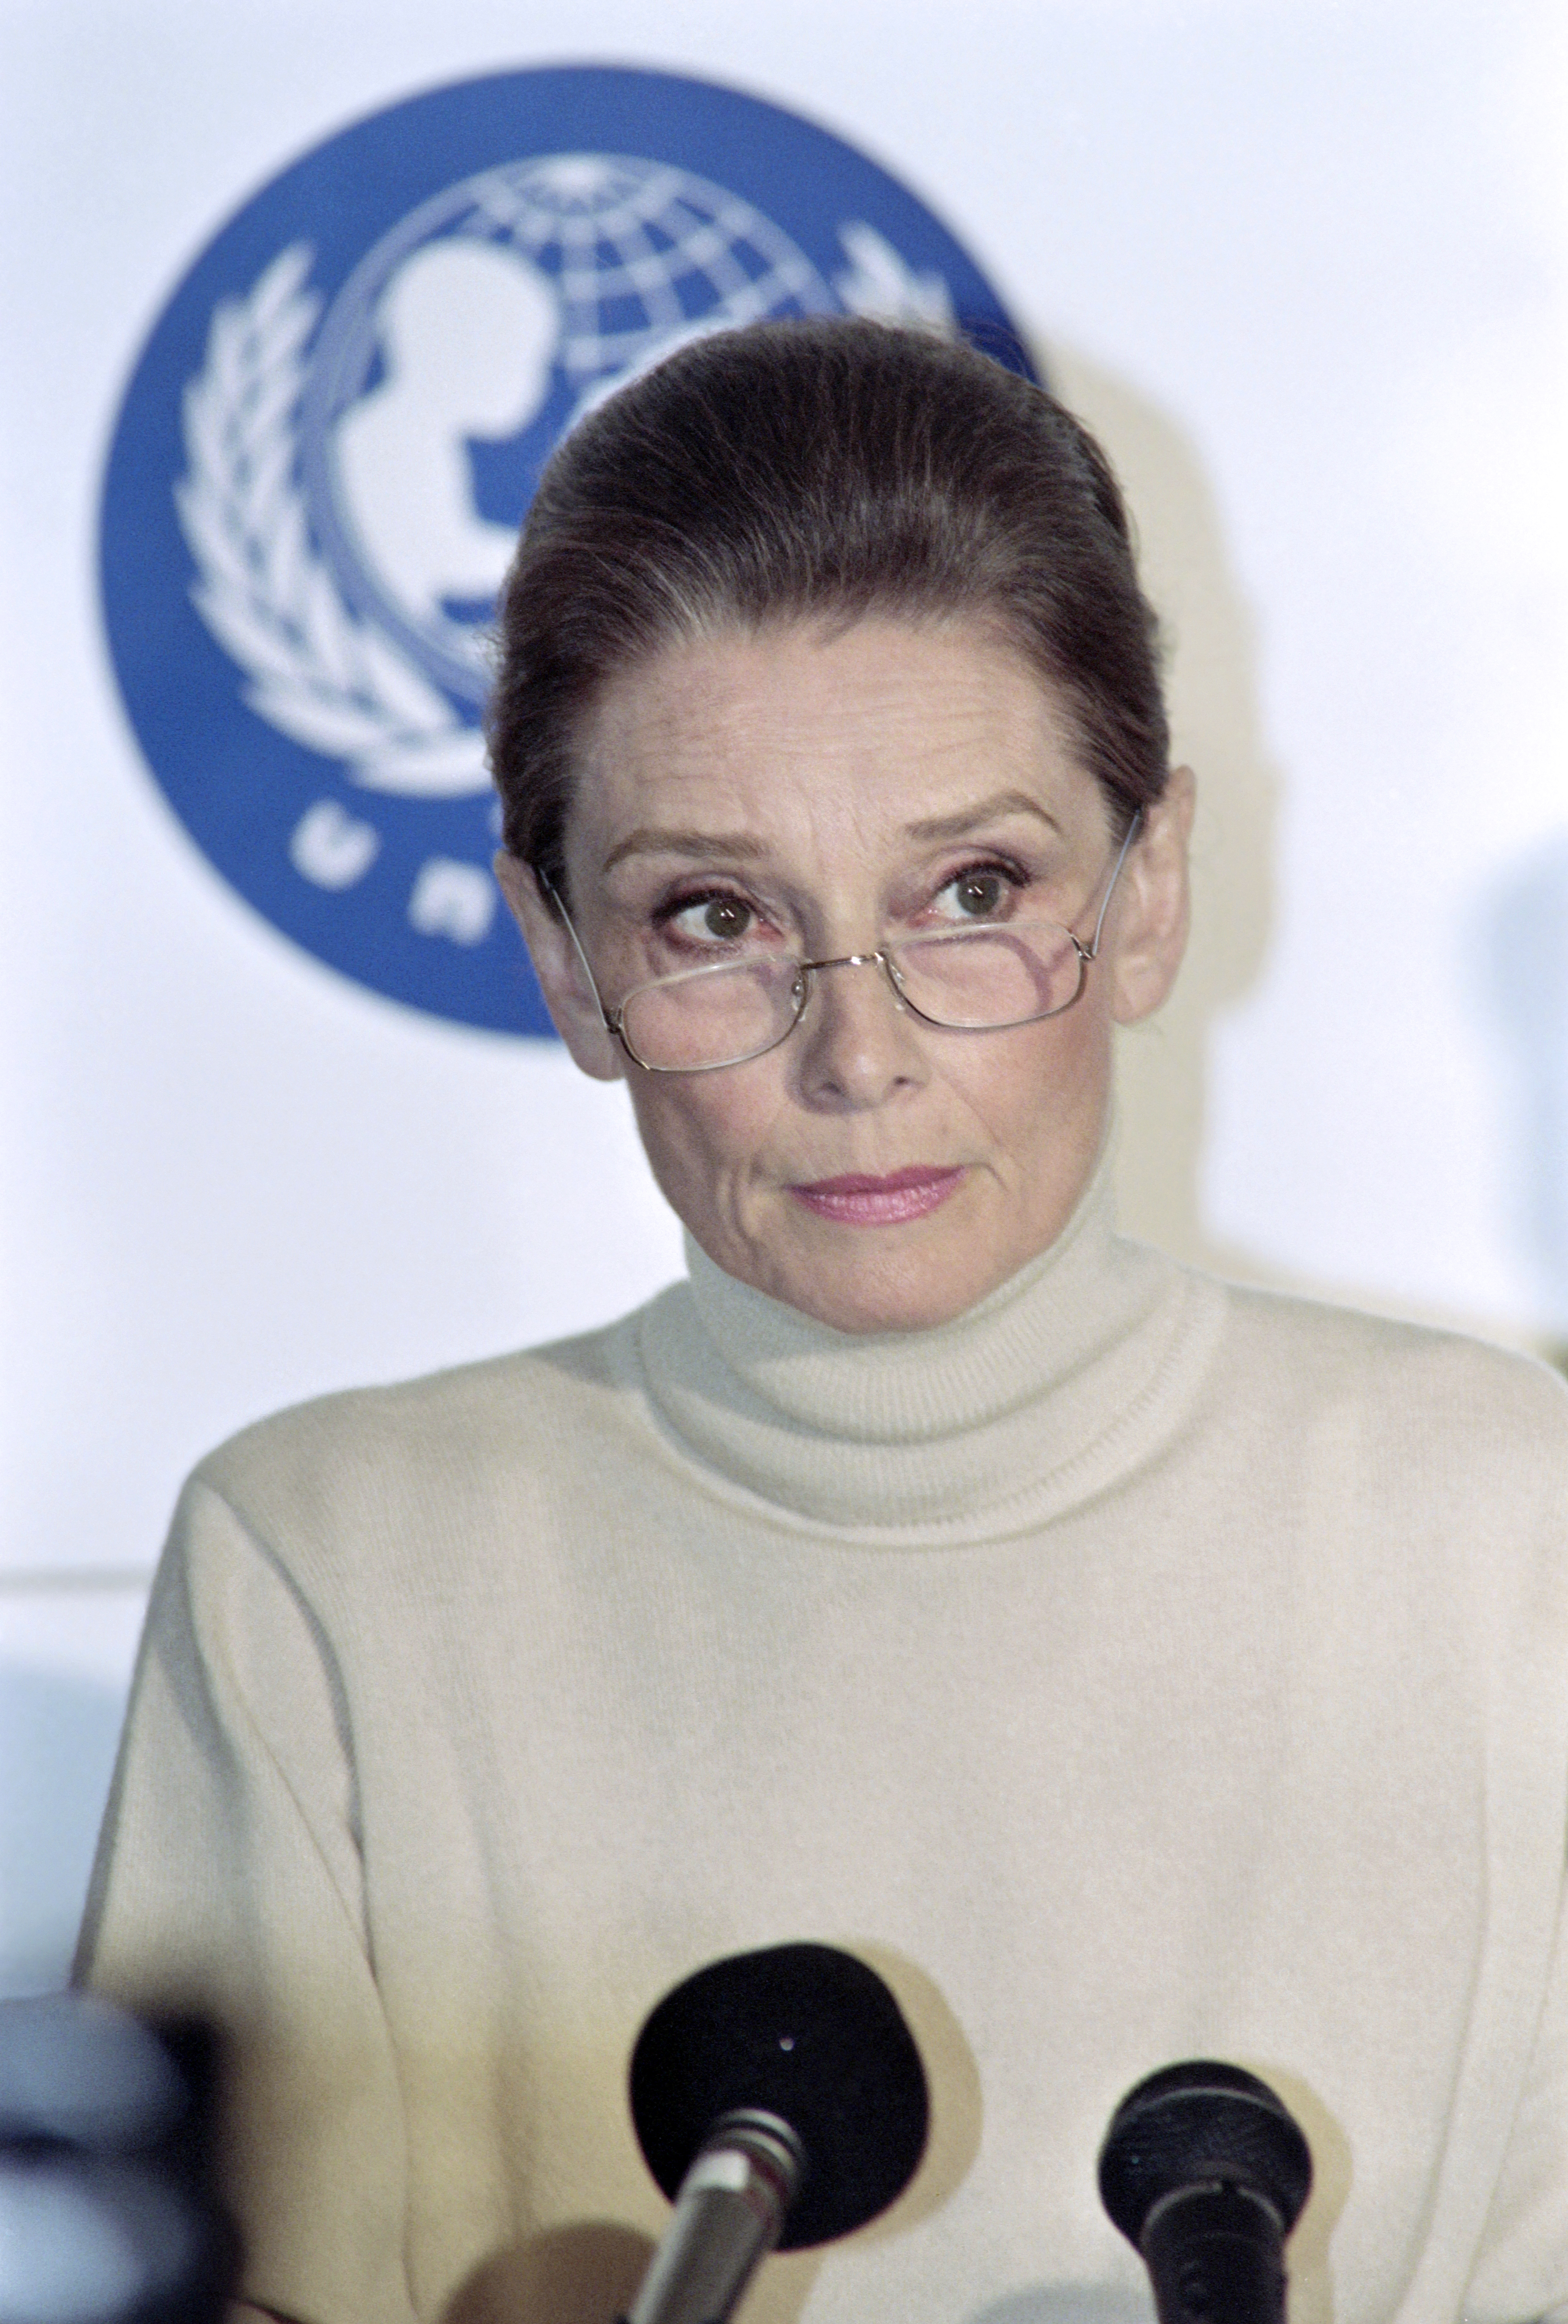 Audrey Hepburn gives a press conference after her return from Somalia in London on September 29, 1992 | Source: Getty Images